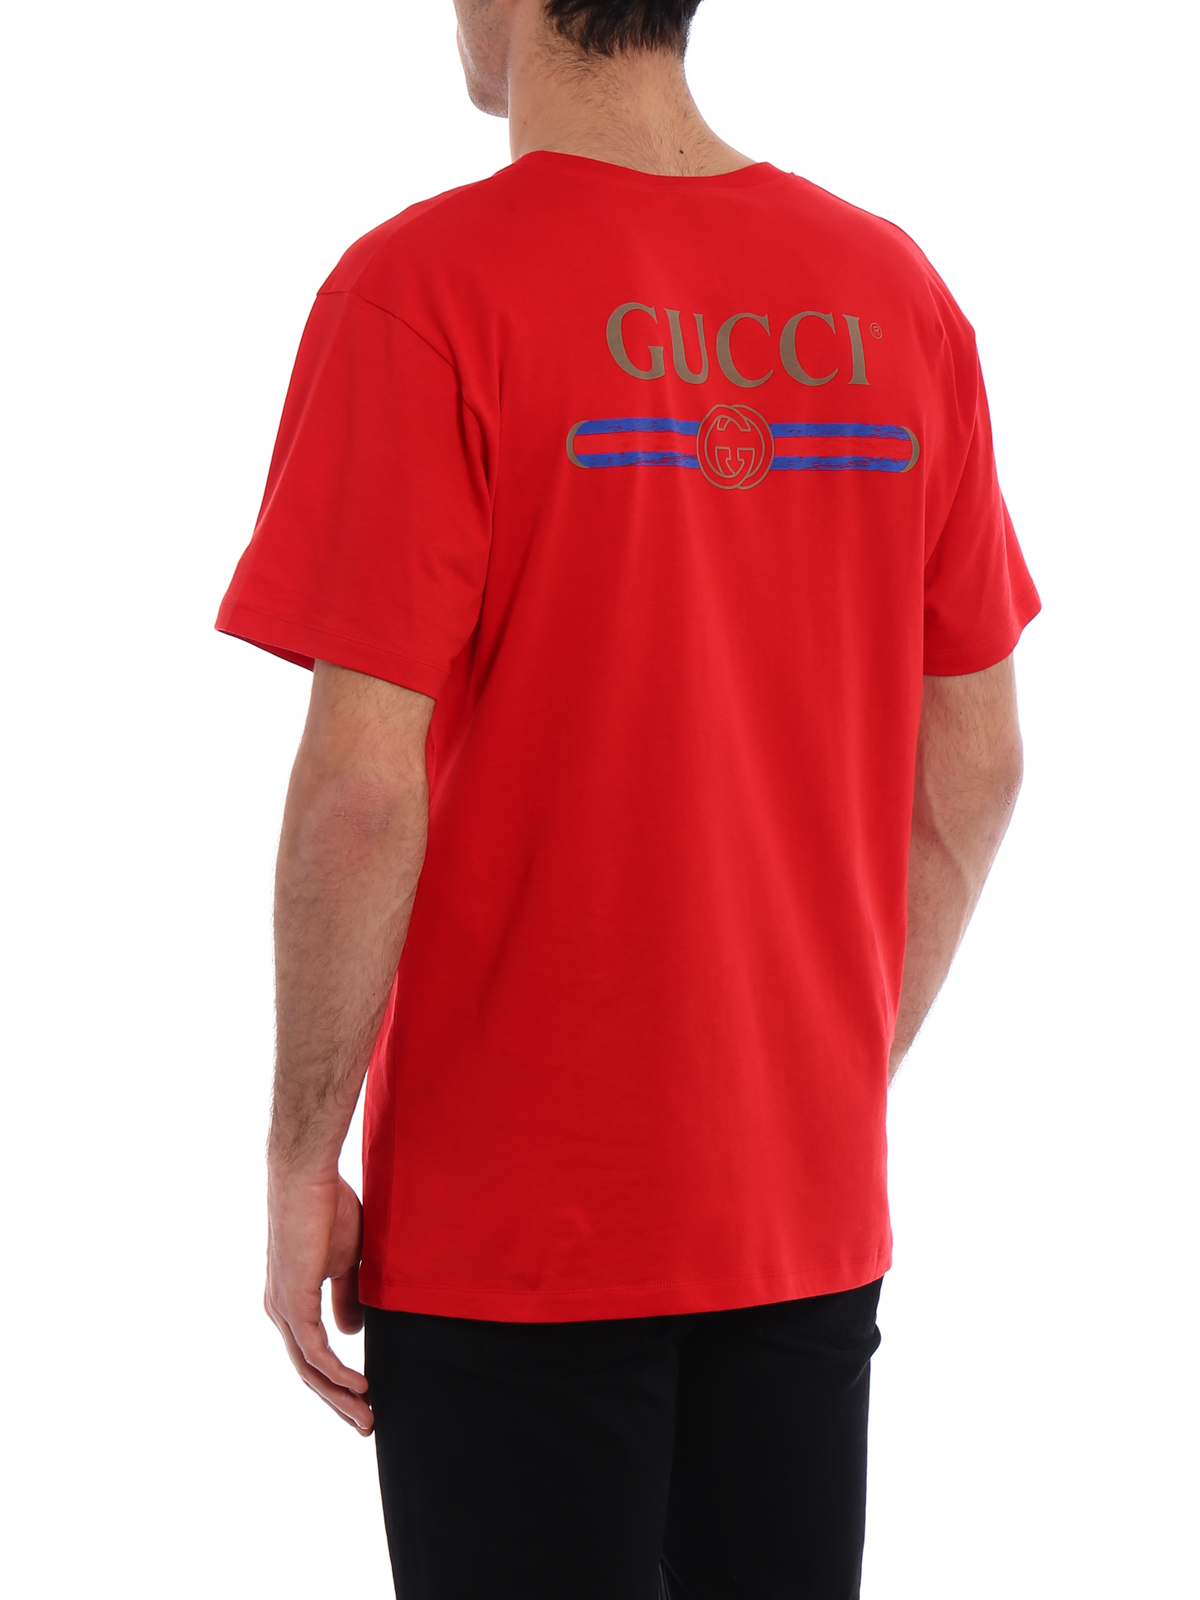 Gucci Red Tee on Sale, 58% OFF | lagence.tv